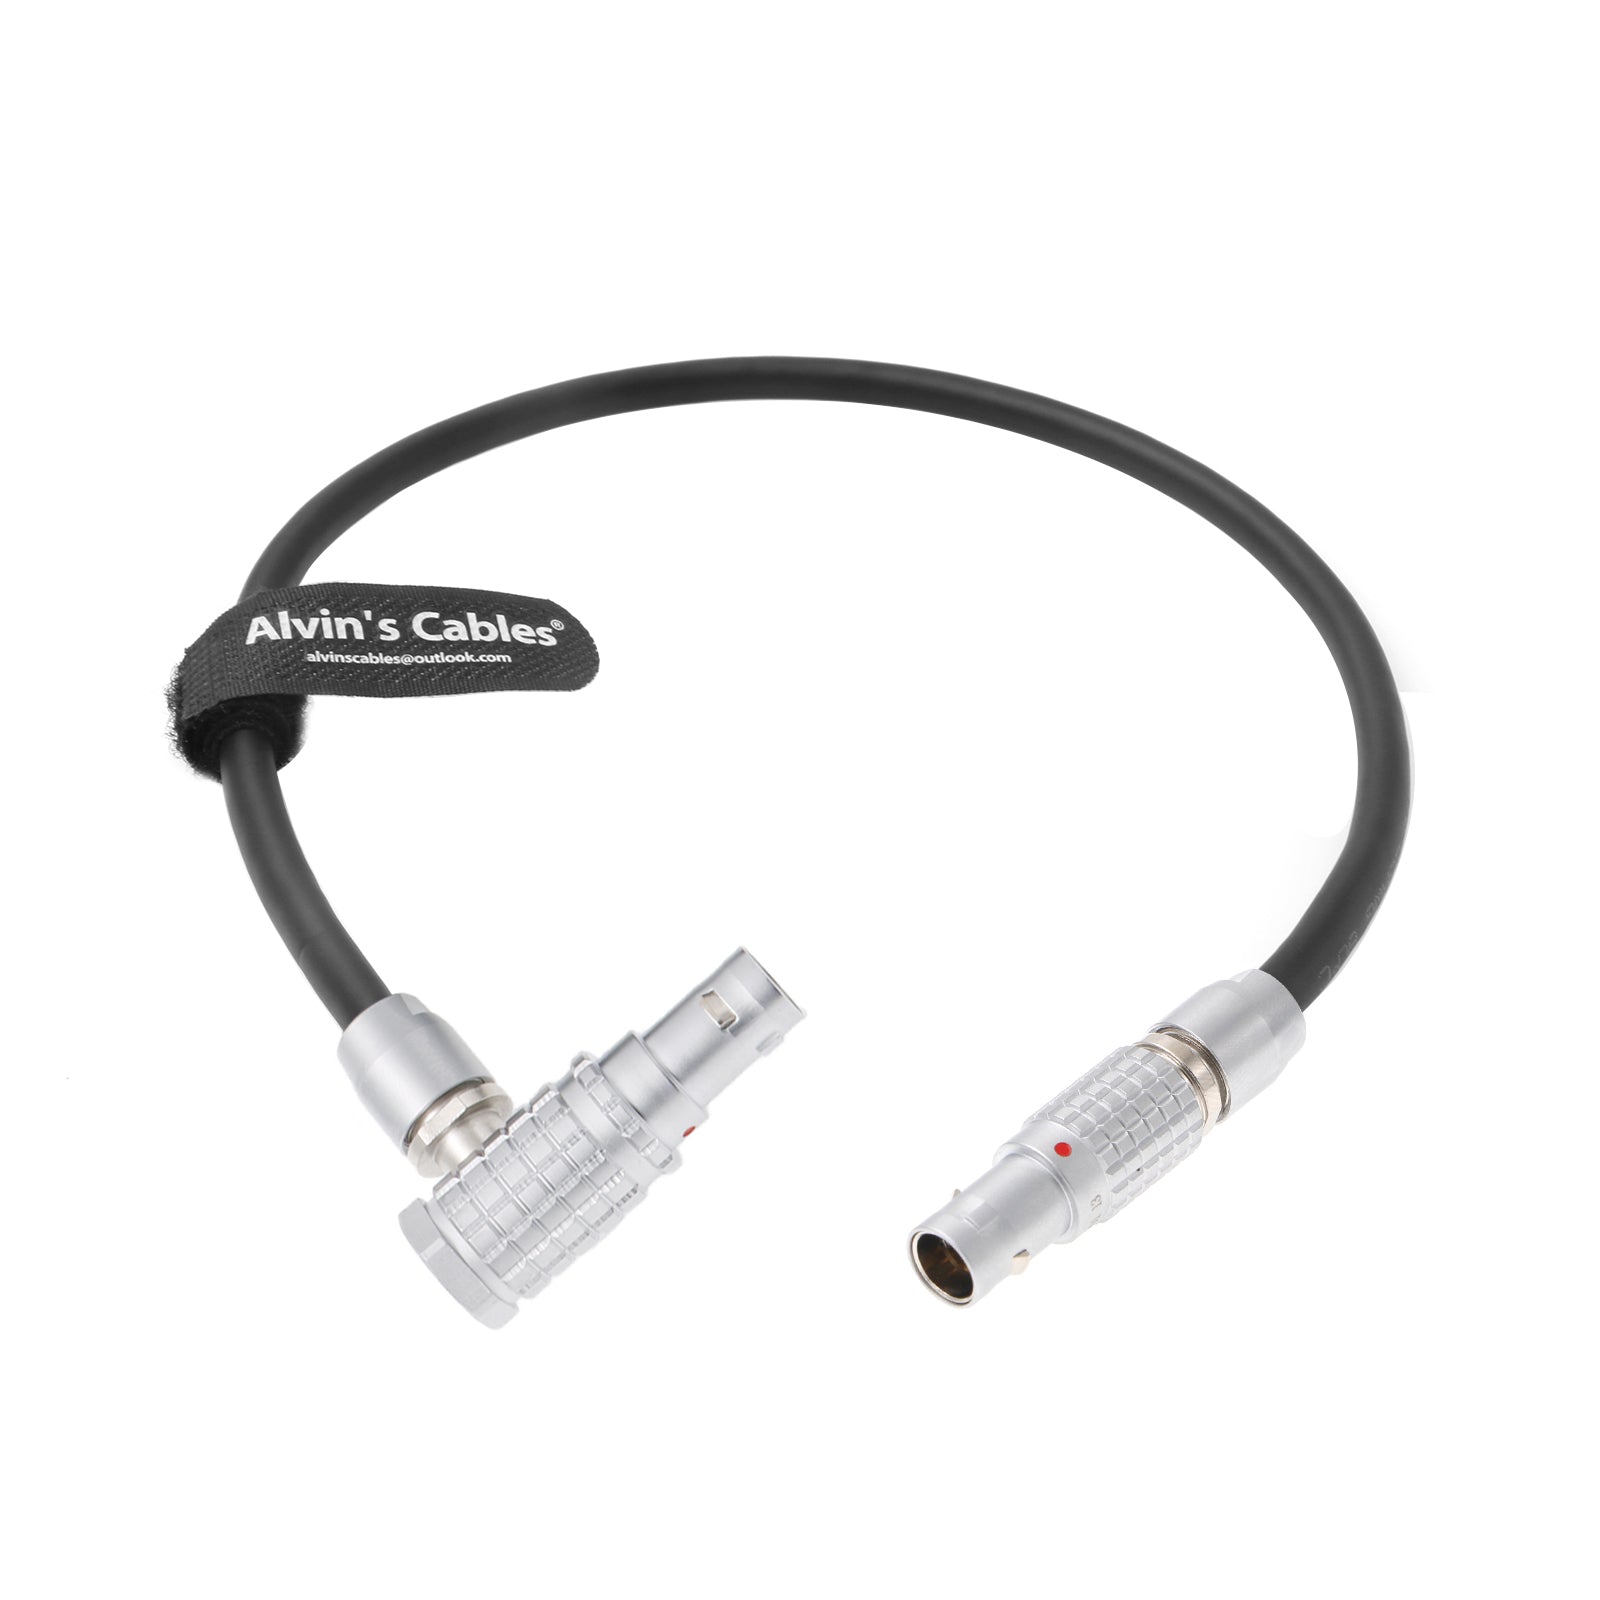 EVF-Cable for Sony-Venice 26 Pin Male to 26 Pin Male Right Angle Alvin's Cables 50CM|19 Inches